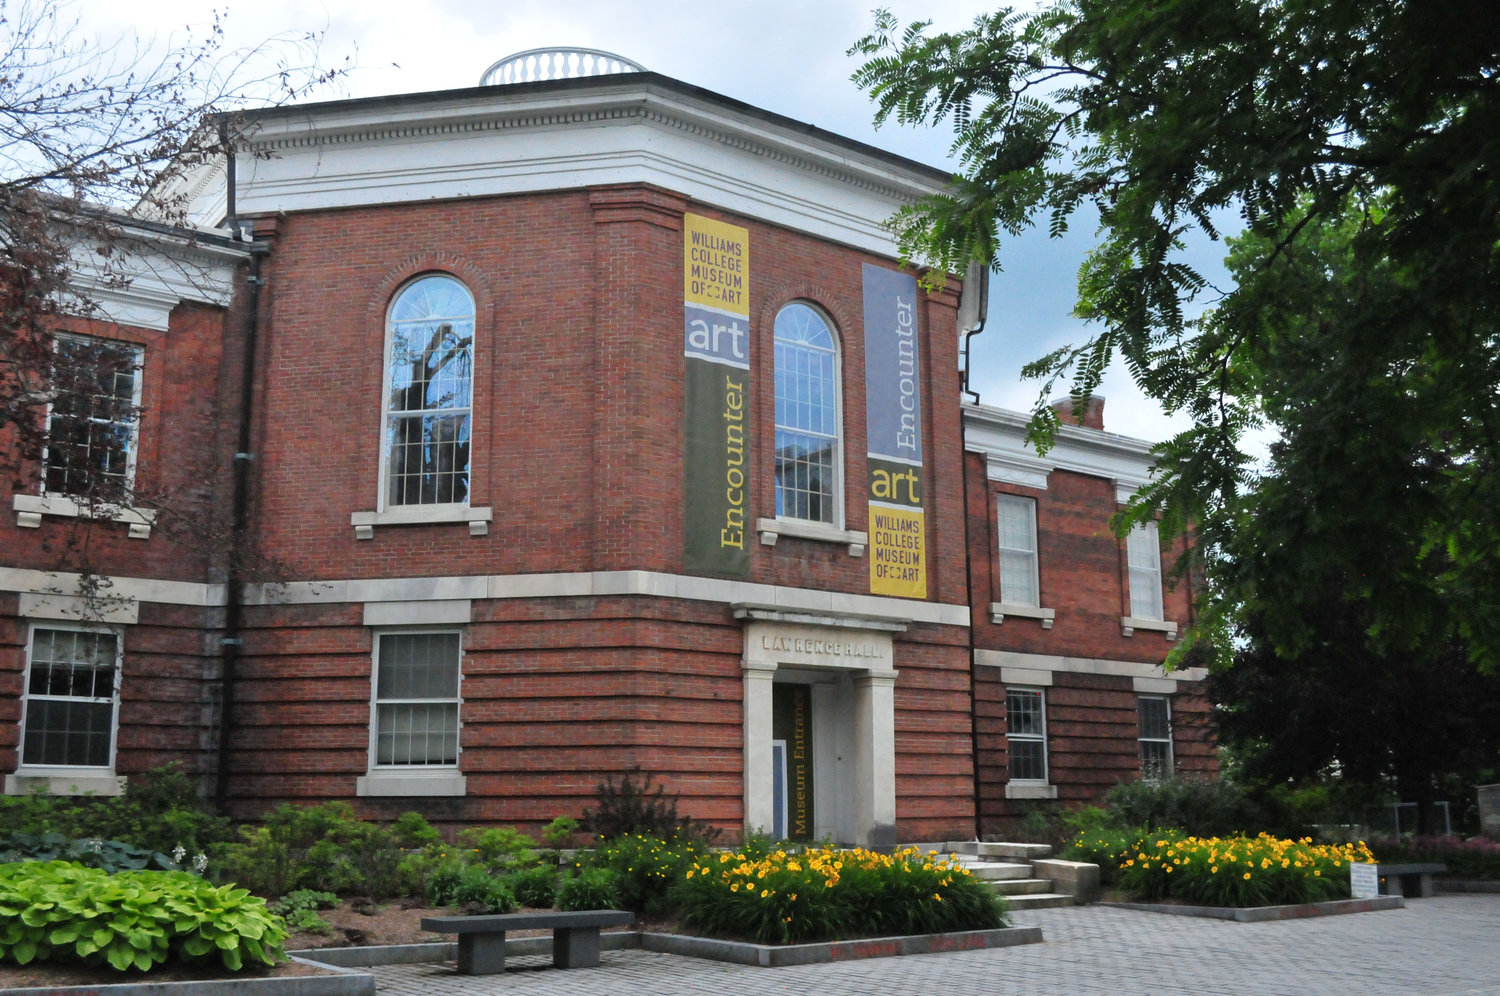 Williams College Museum of Art is a client of David J. Tierney, Jr., Inc.